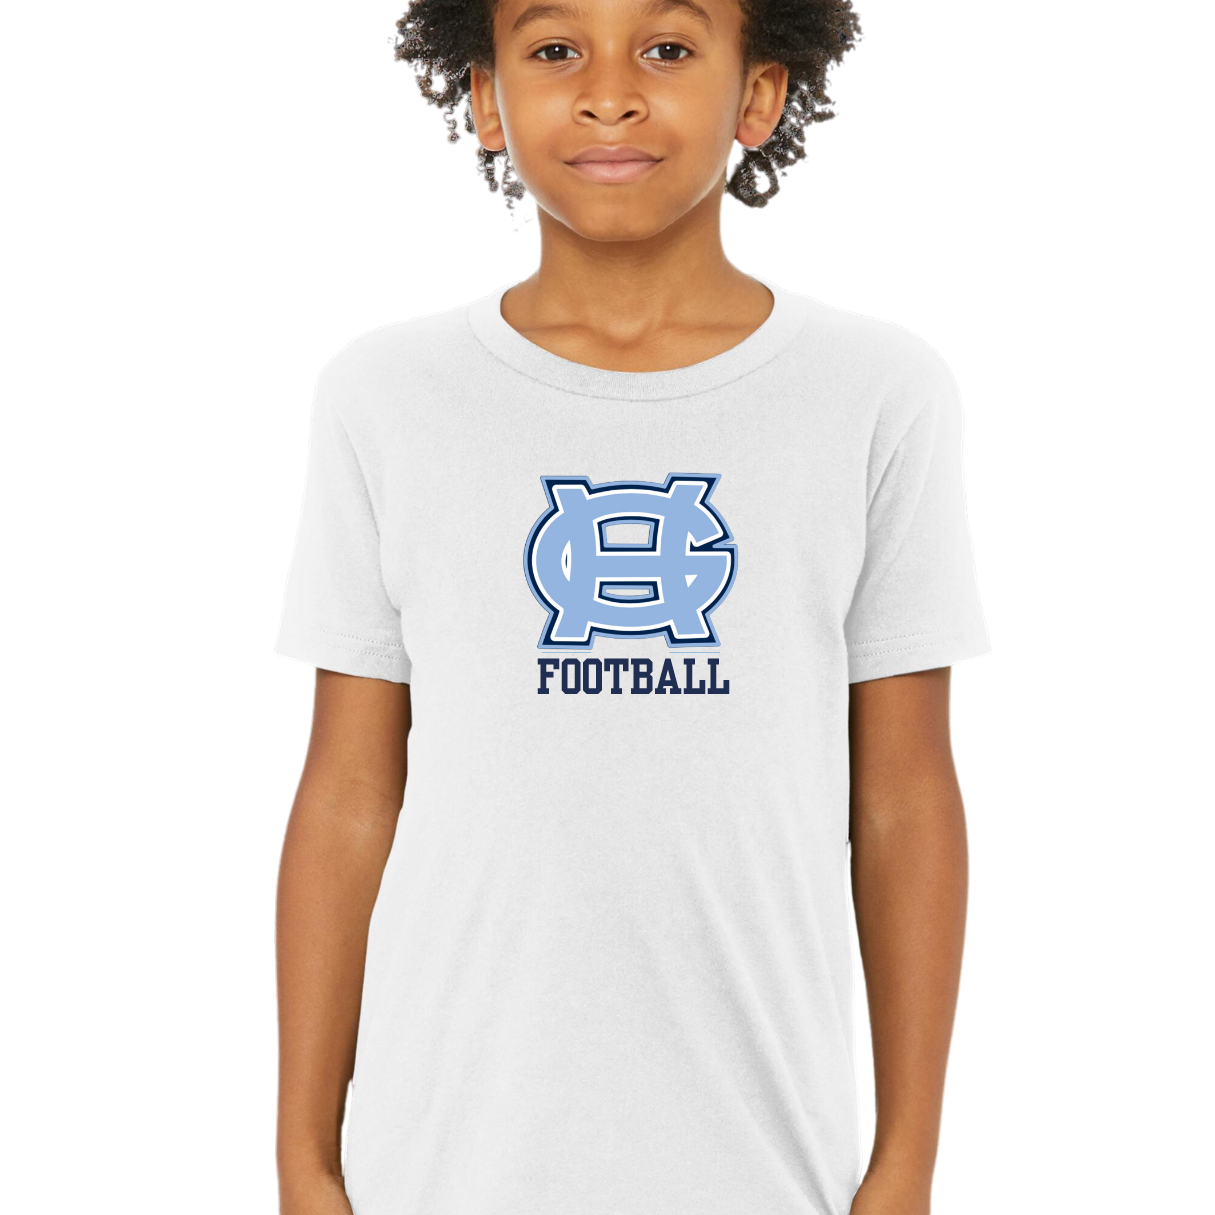 Classic GH Football Tee- Adult and Youth